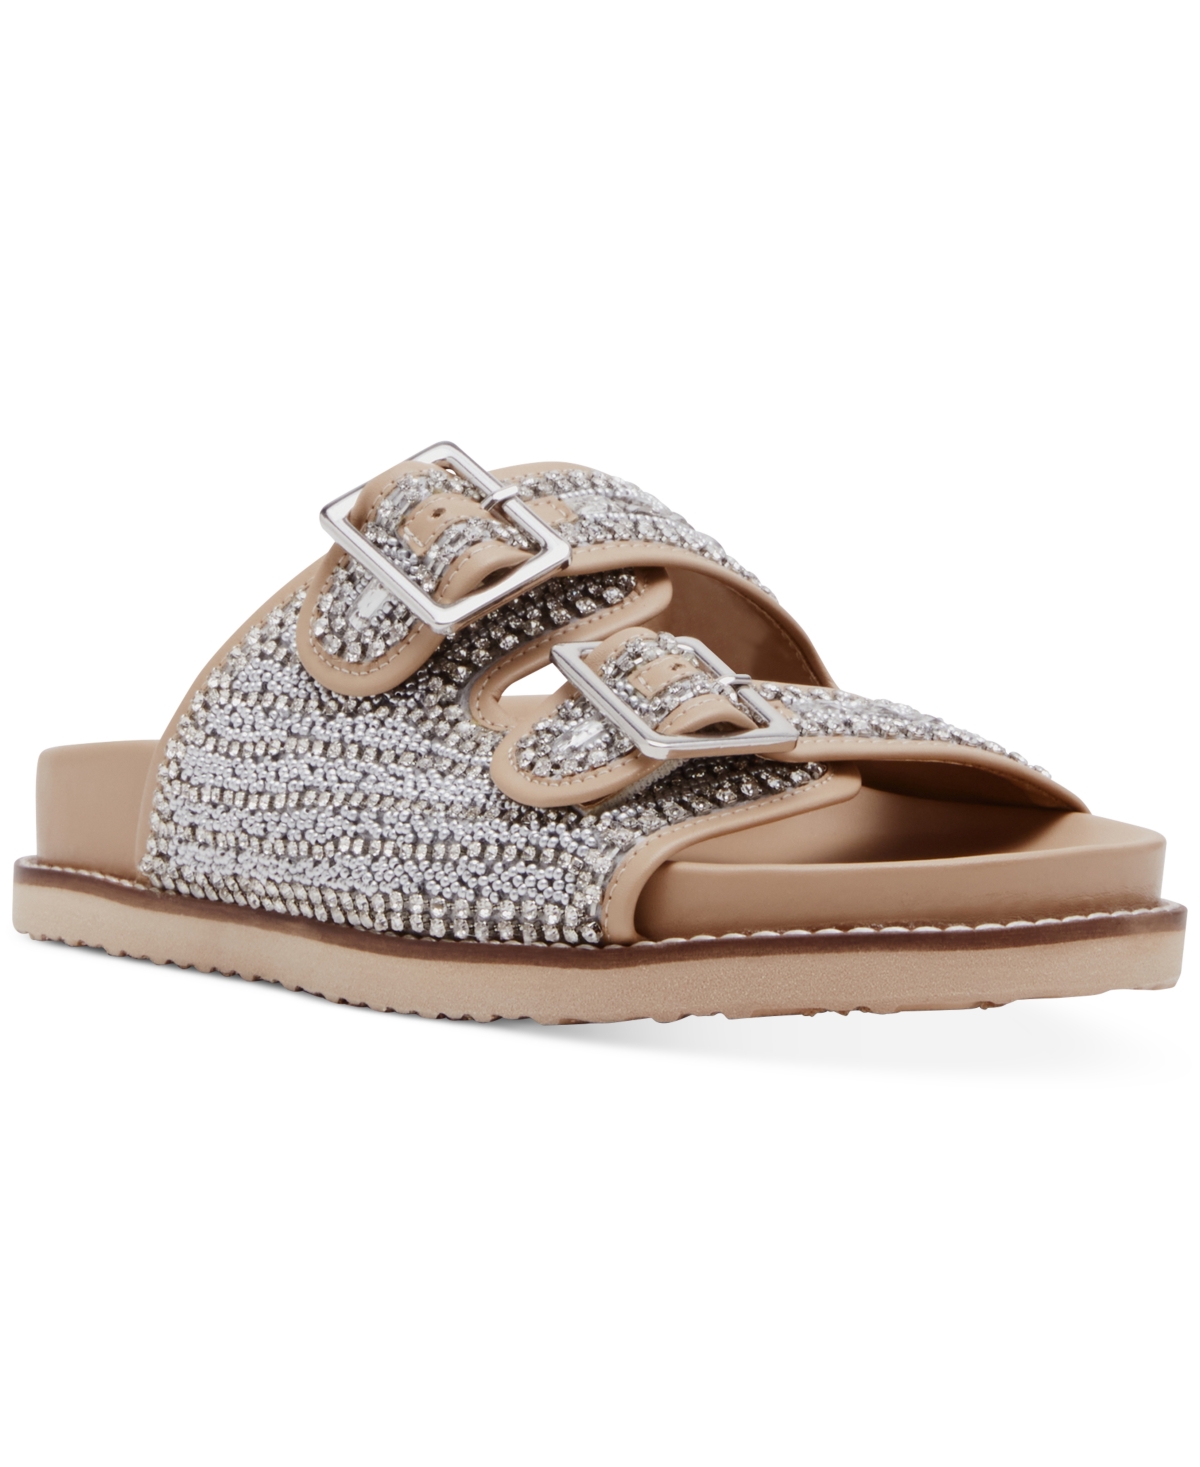 Steve Madden Women's Cabo Embellished Footbed Sandals In Silver Rhinestone